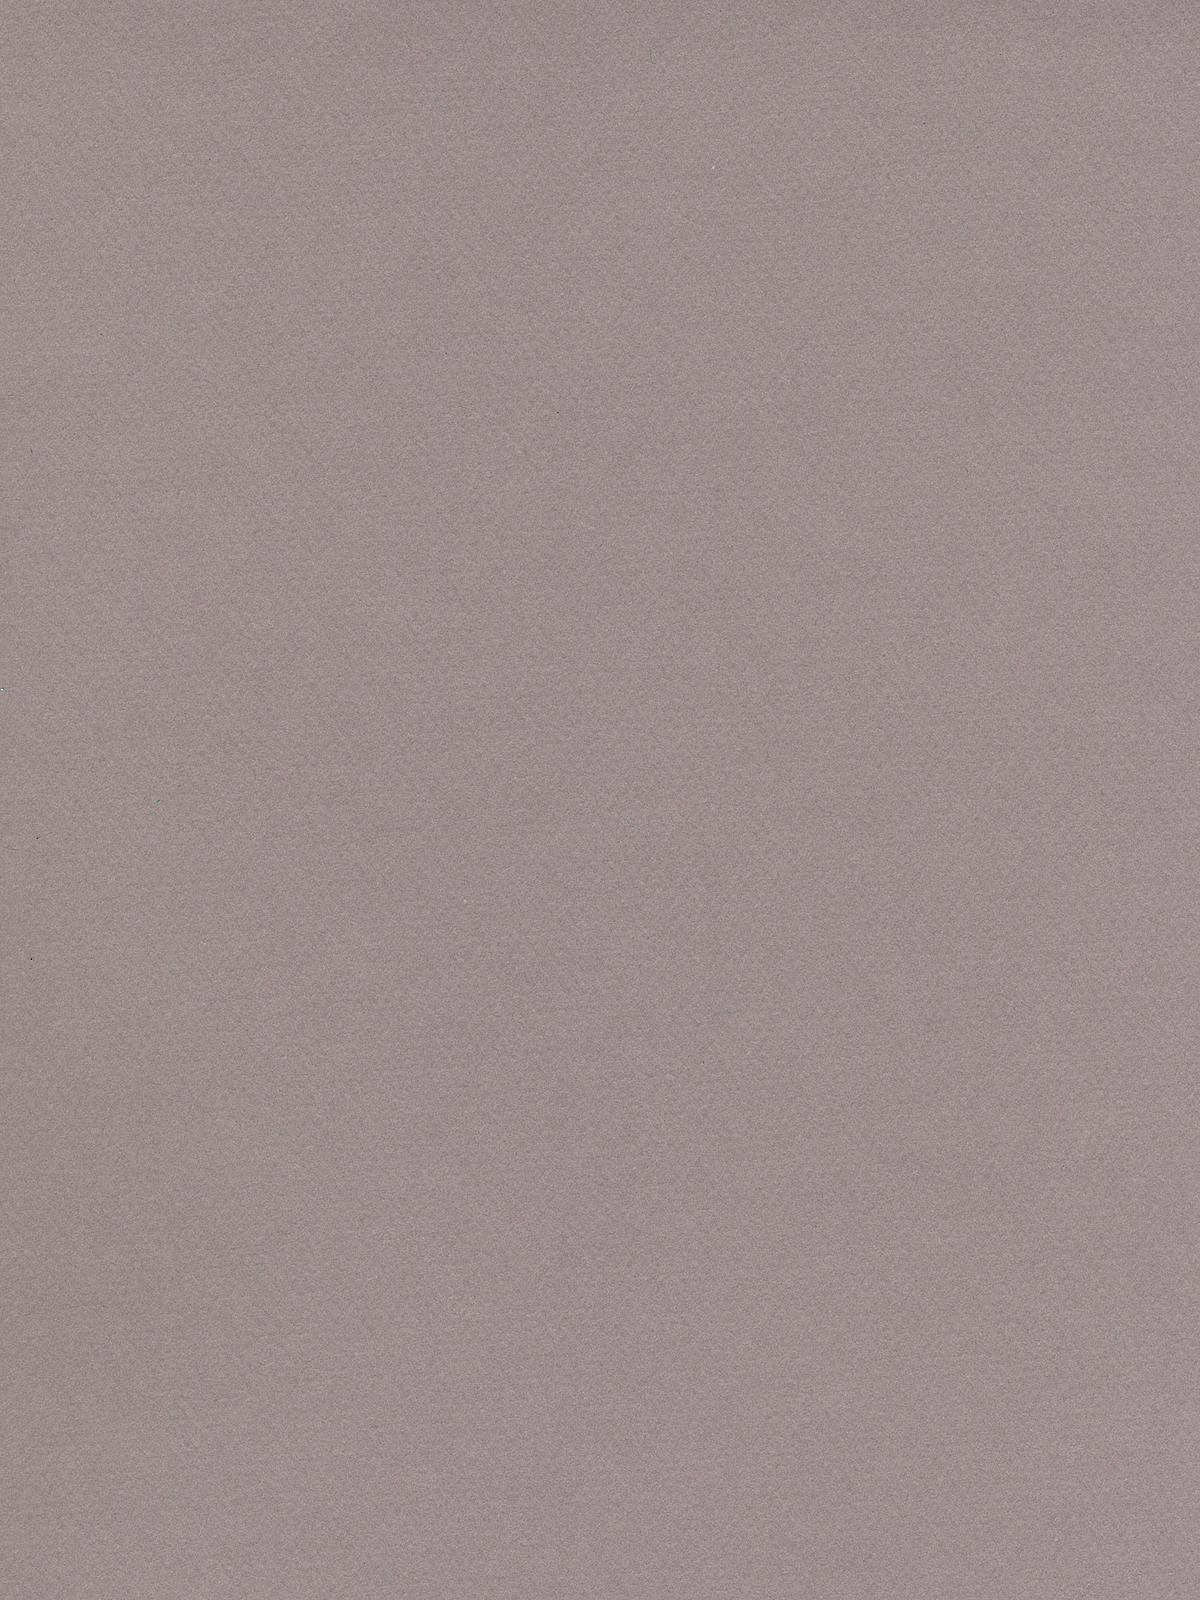 Mi-teintes Tinted Paper Flannel Grey 19 In. X 25 In.